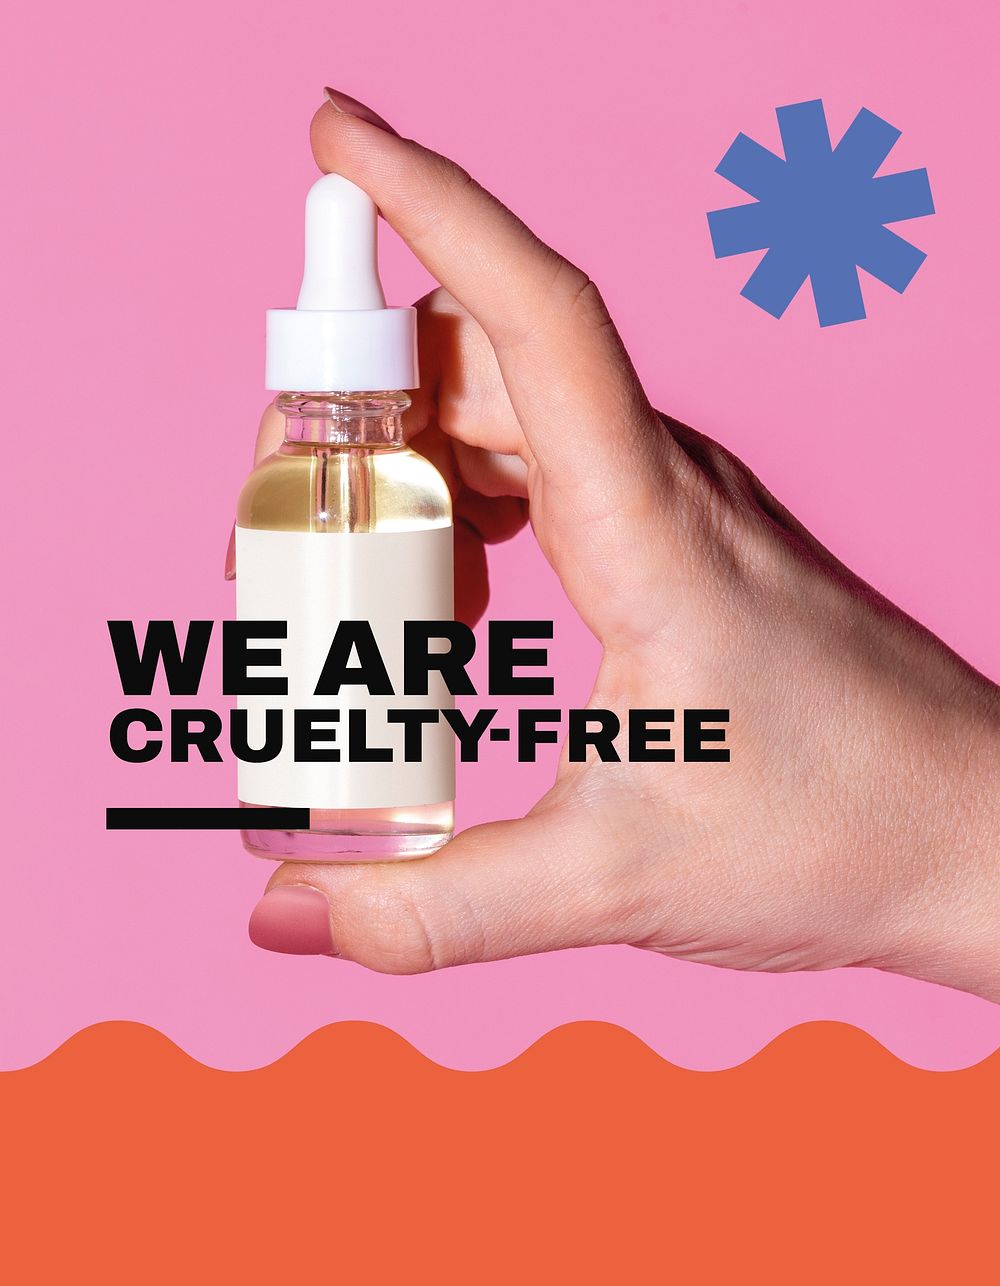 Cruelty-free skincare flyer editable template, business ad psd